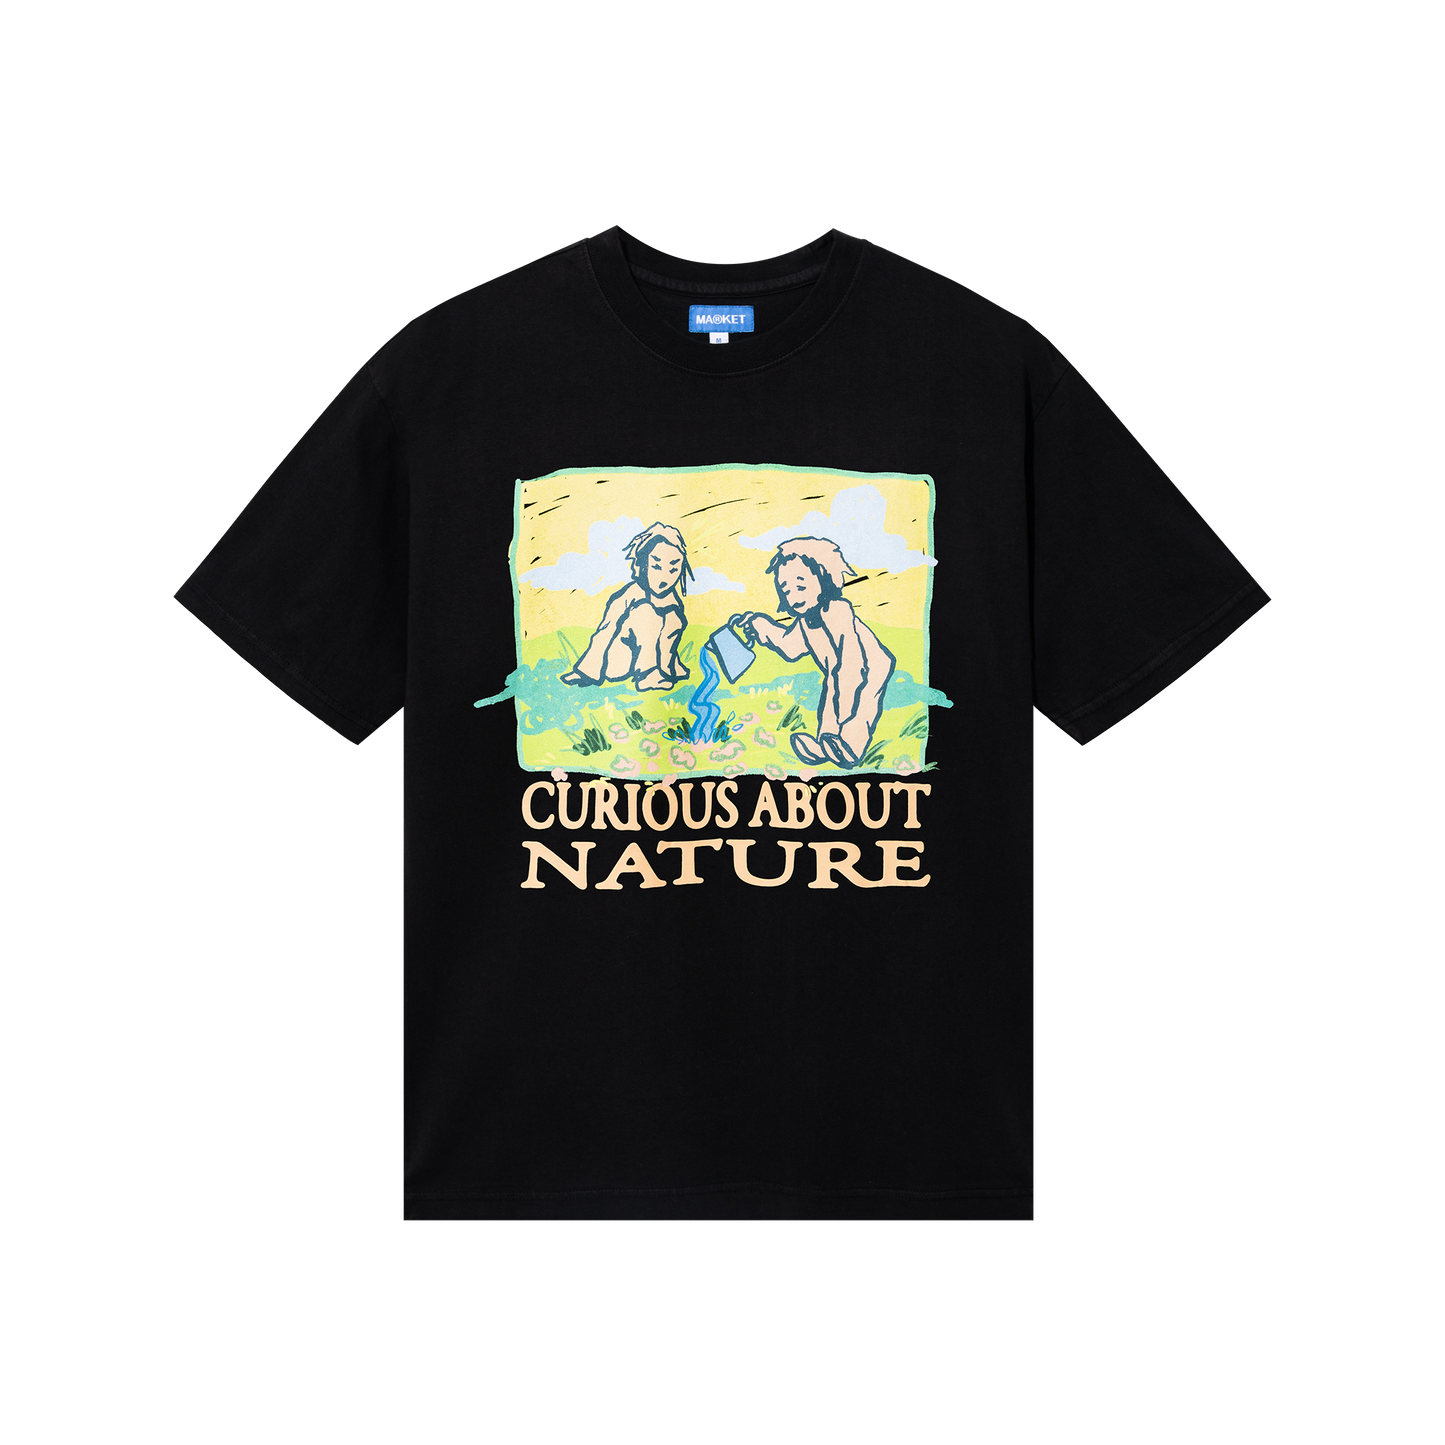 MARKET clothing brand CURIOUS ABOUT NATURE T-SHIRT. Find more graphic tees, hats, hoodies and more at MarketStudios.com. Formally Chinatown Market.